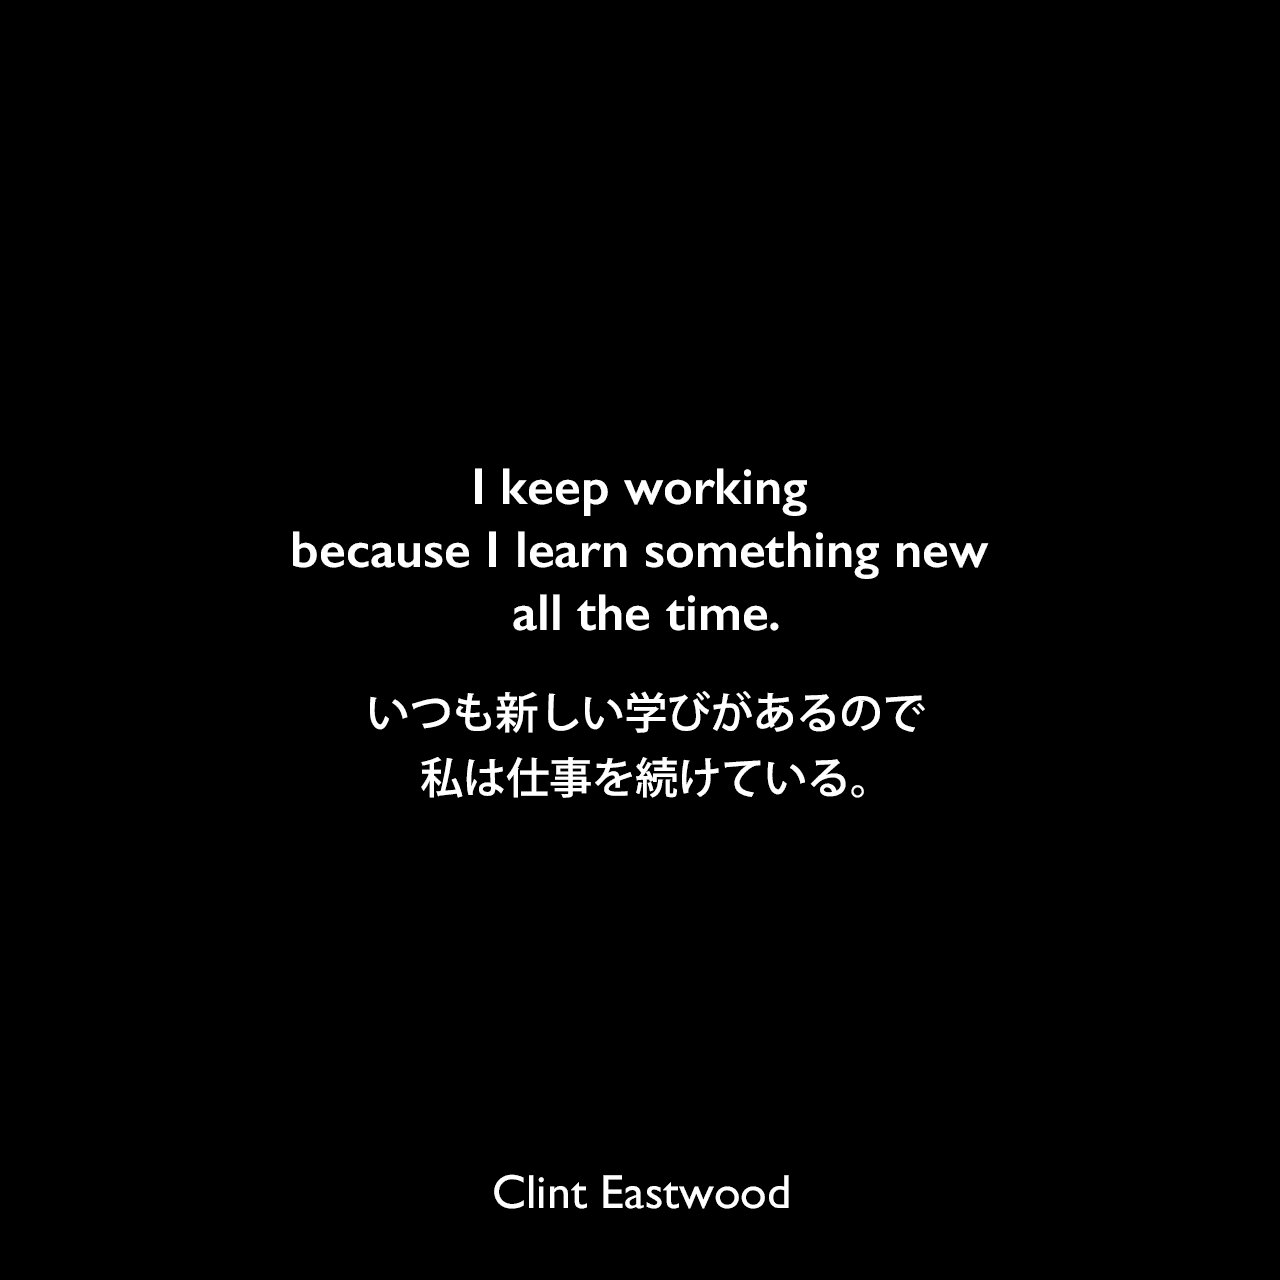 I keep working because I learn something new all the time.いつも新しい学びがあるので、私は仕事を続けている。